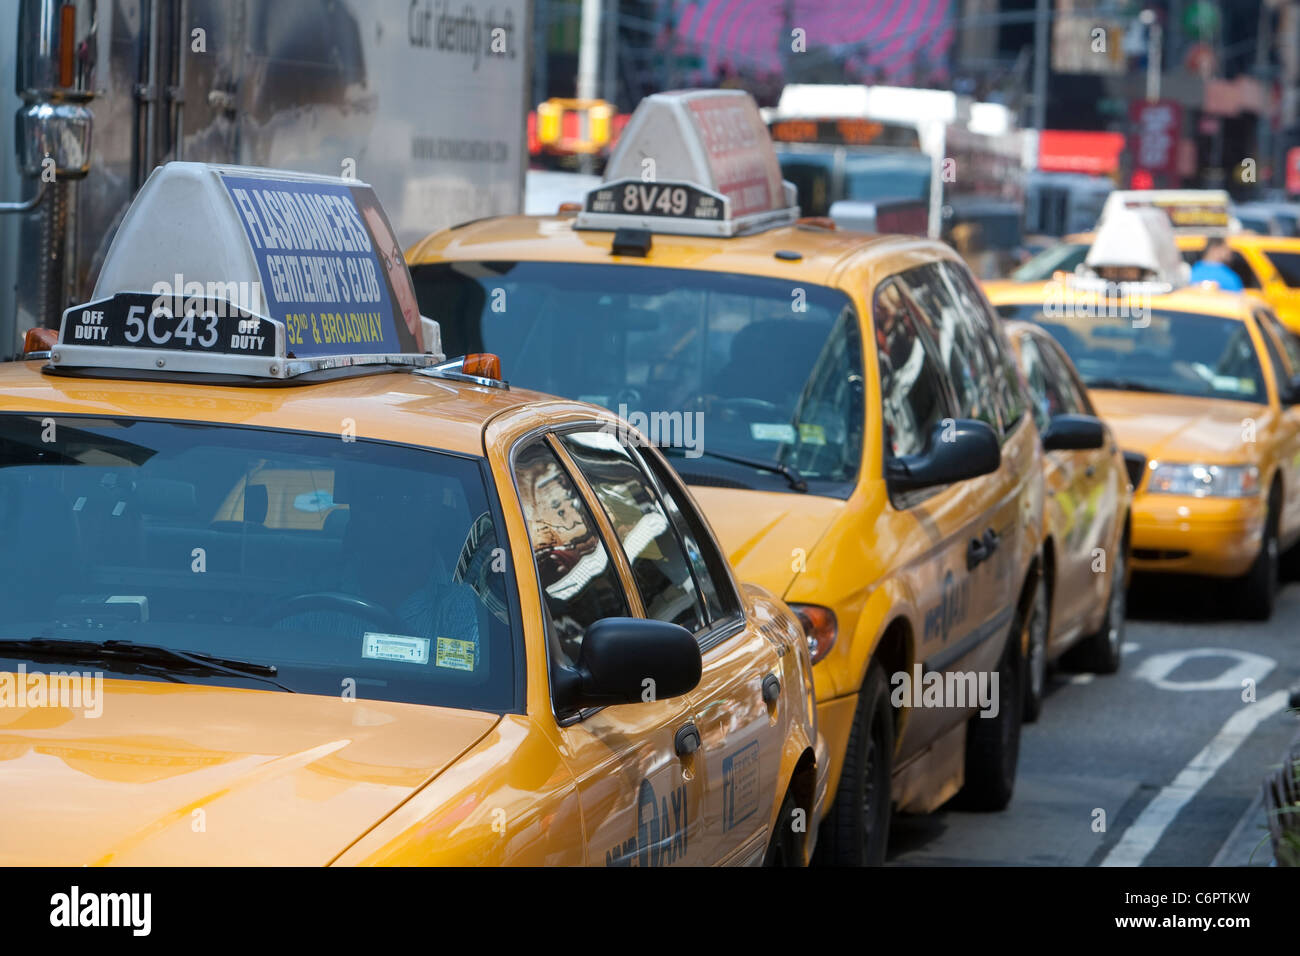 A NYC Taxis are lined up in the New York City borough of Manhattan, NY, Tuesday August 2, 2011. Stock Photo